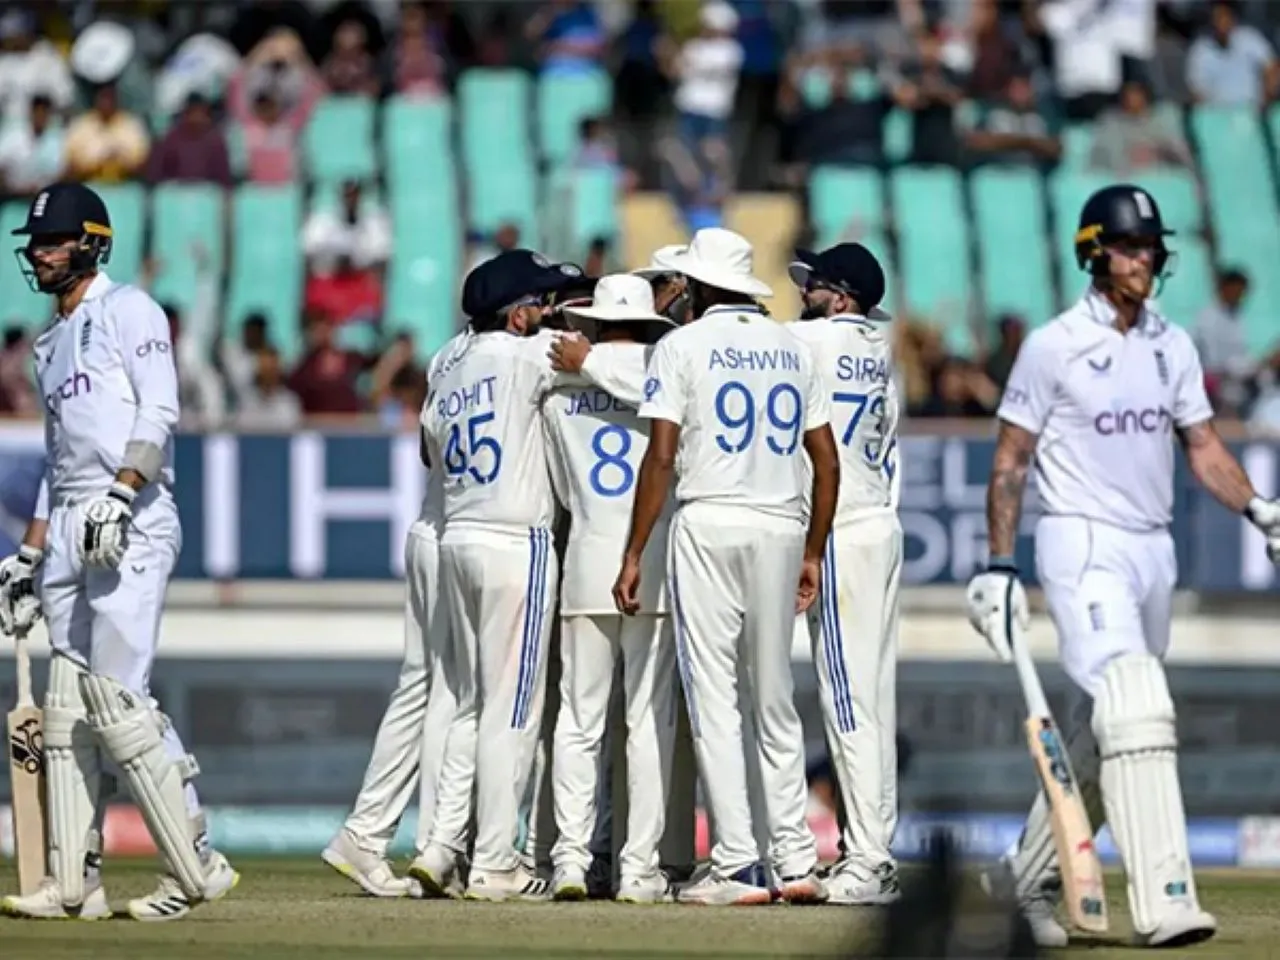 India on top in Test rankings, to remain 1st regardless of NZ vs AUS result